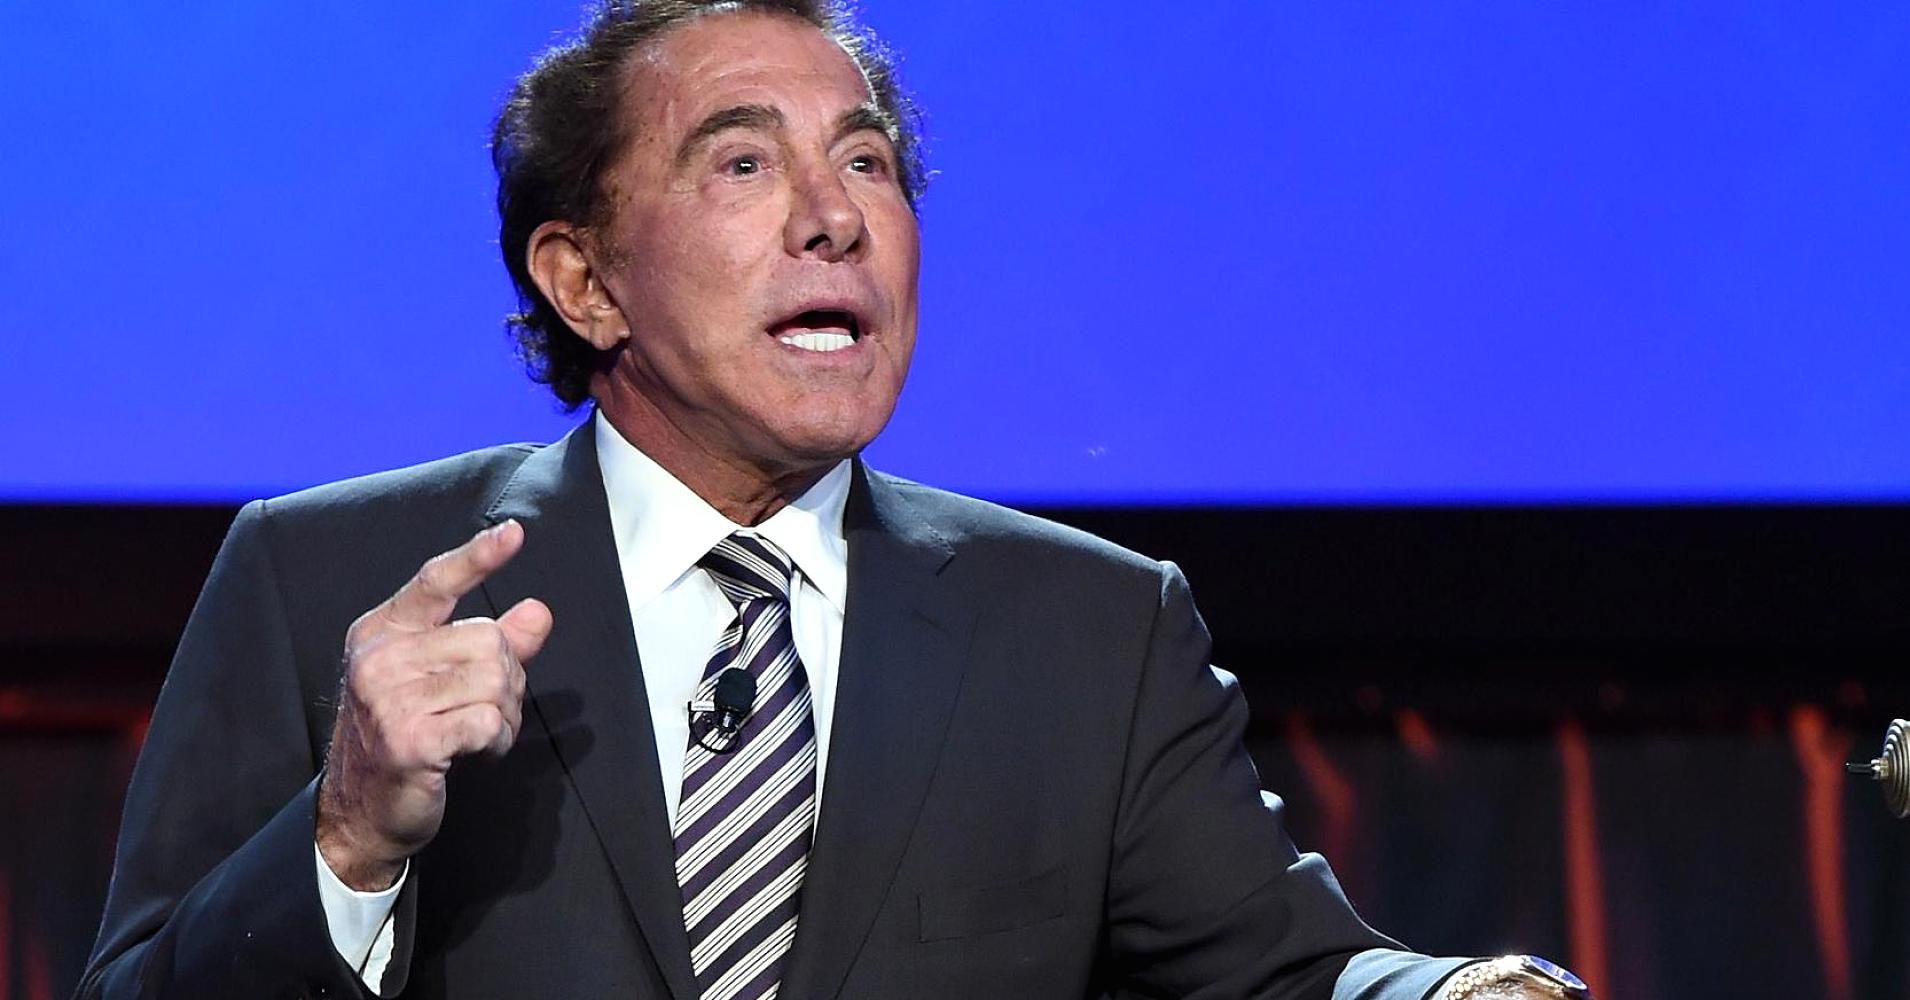 Steve Wynn Resigns As Rnc Finance Chair Role Amid Misconduct Allegations Free America Network